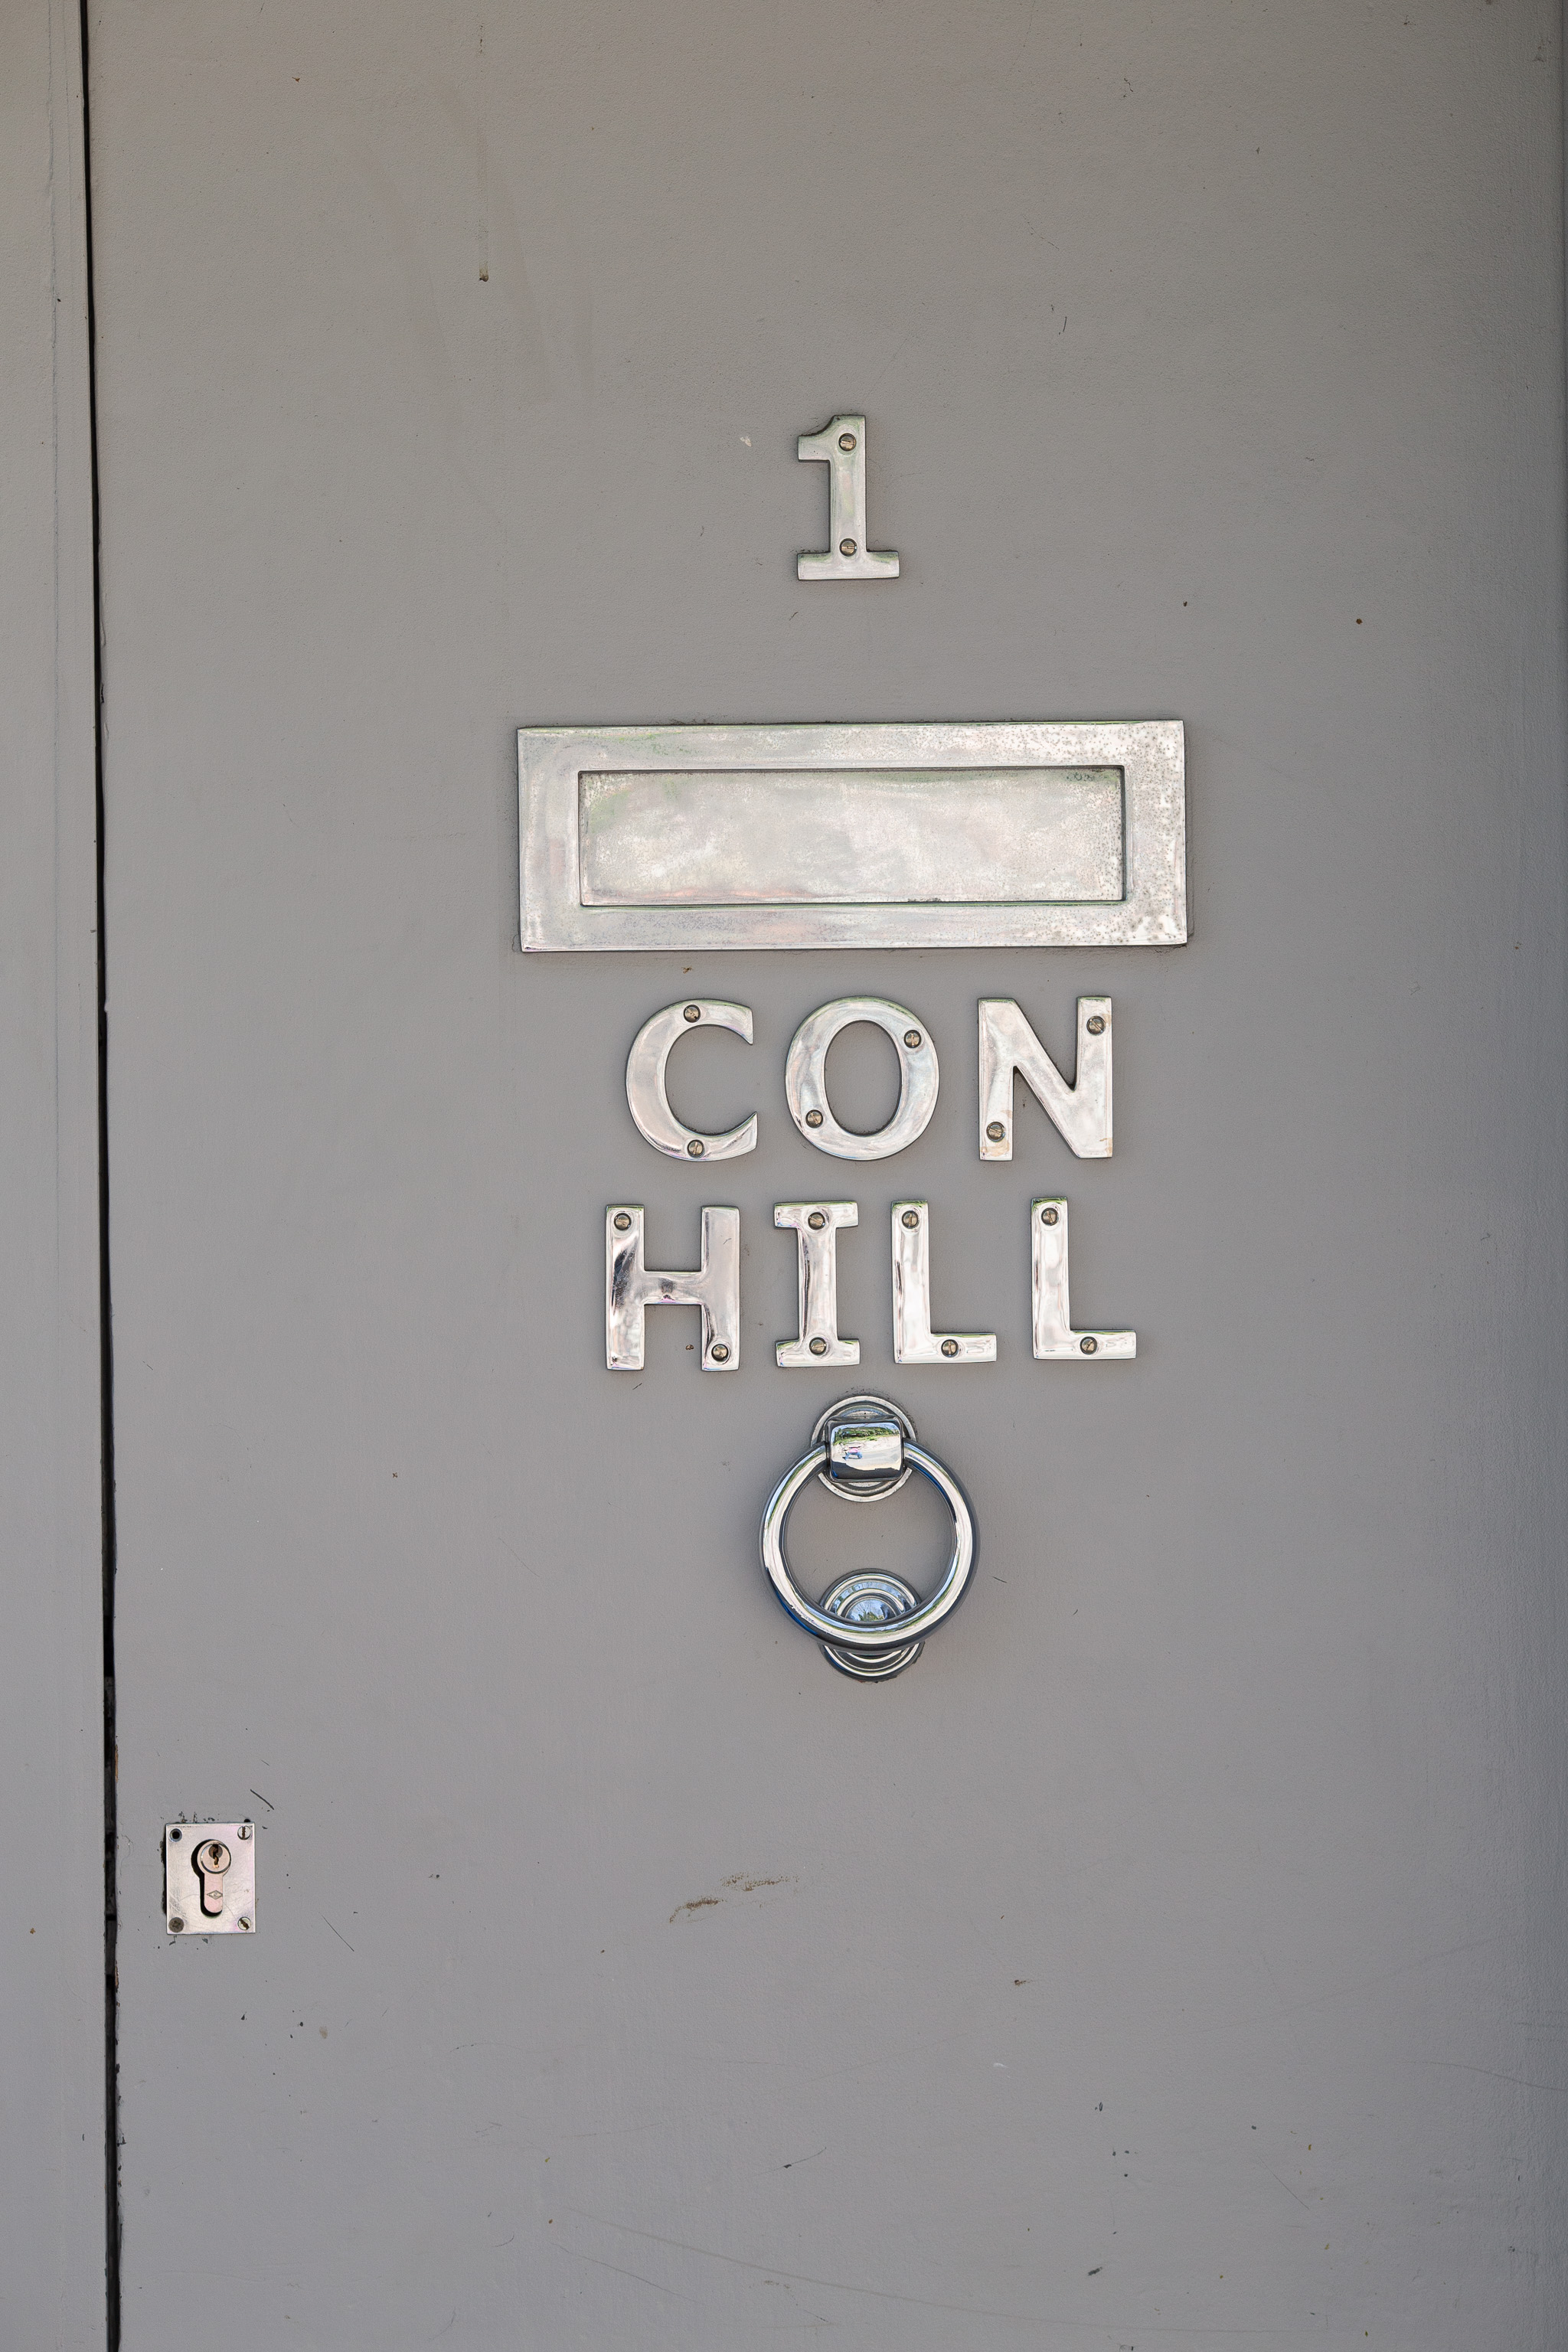 1 CON HILL
Bold. I can only presume that no. 1 Constitution Hill had some issues with post being put through the wrong door, or something.
